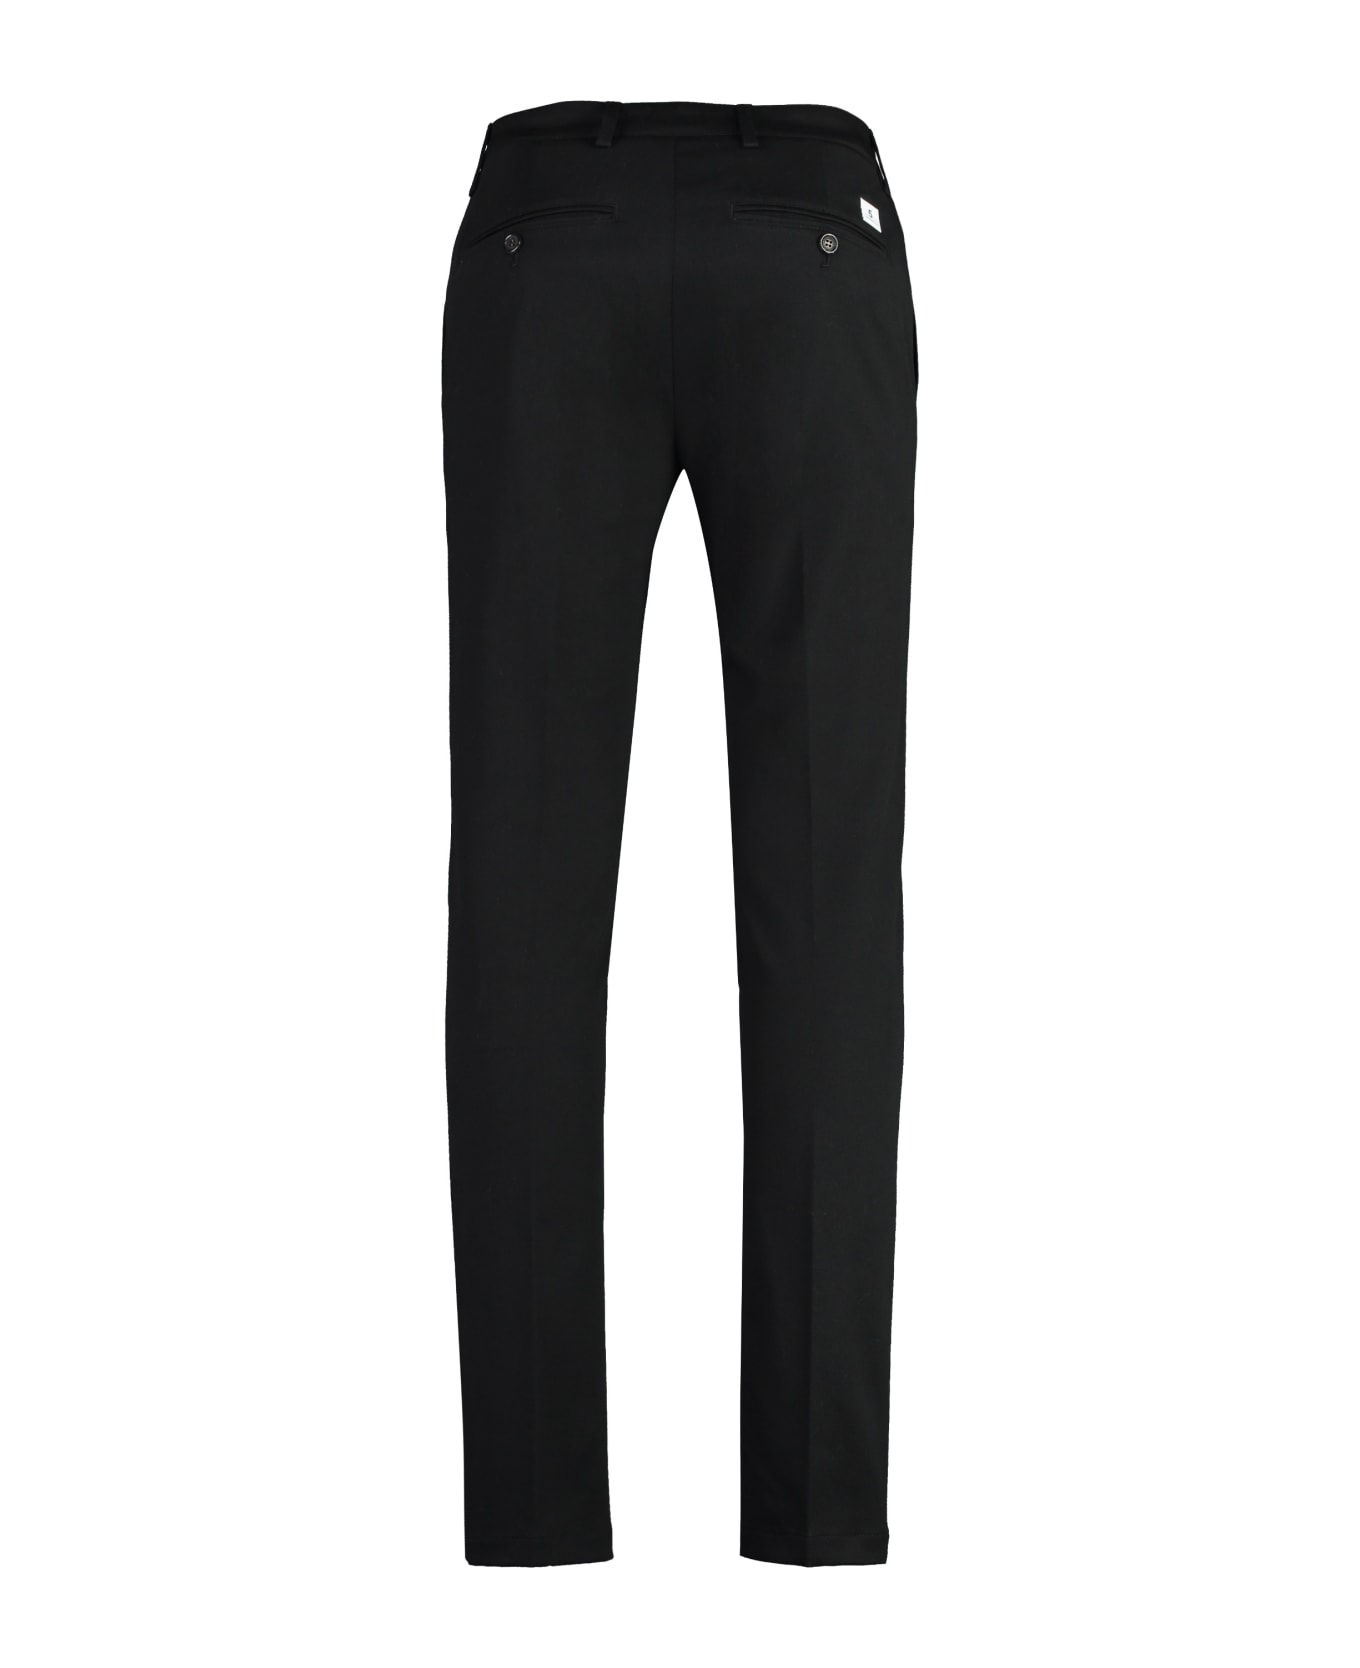 Department Five Mike Chino Pants - black